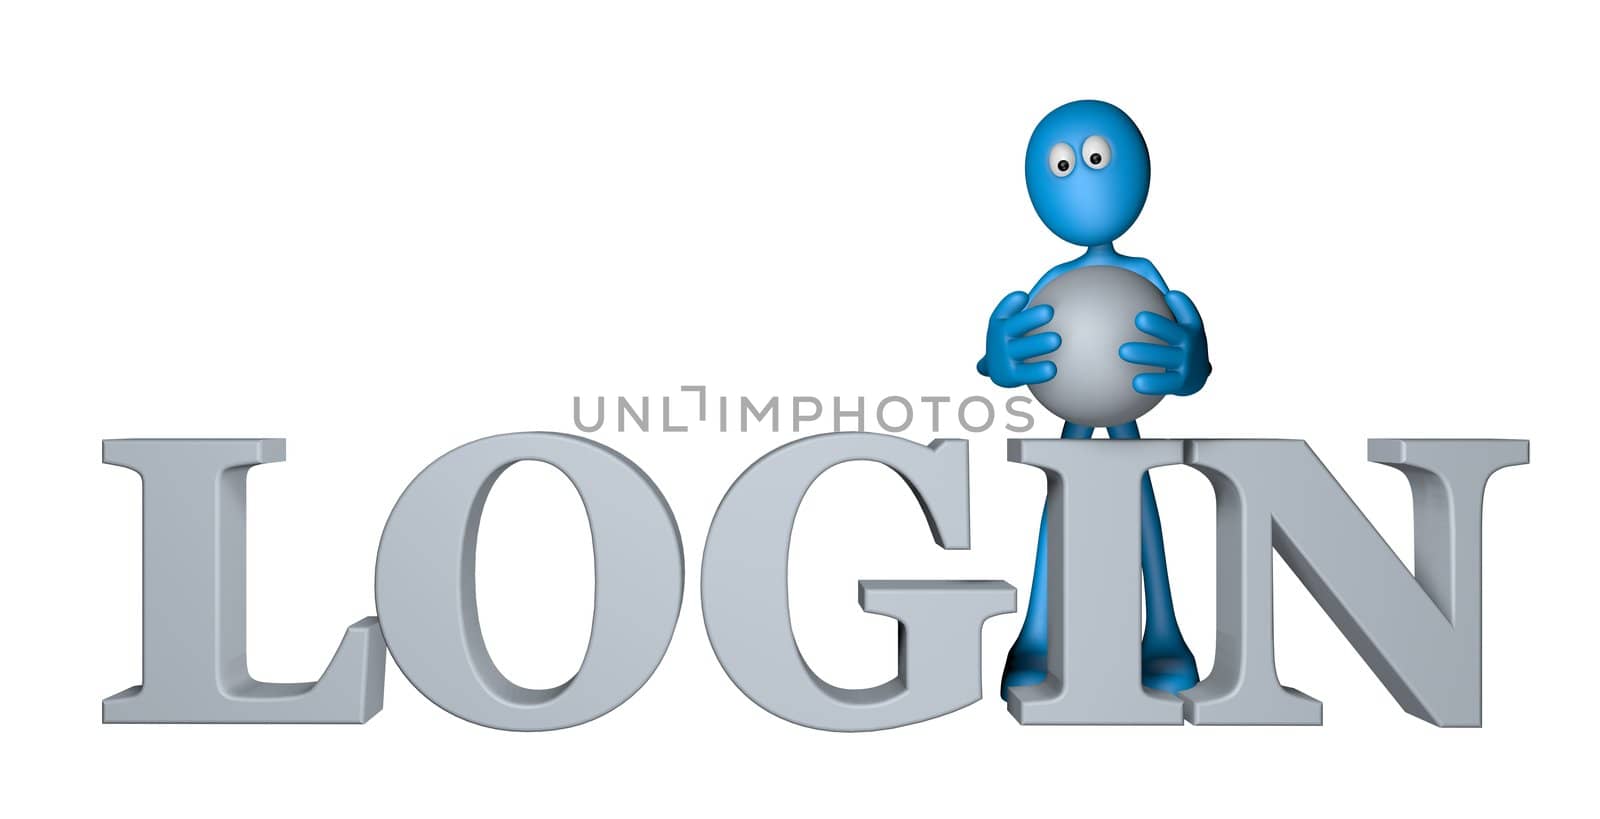 blue guy and the word login - 3d illustration